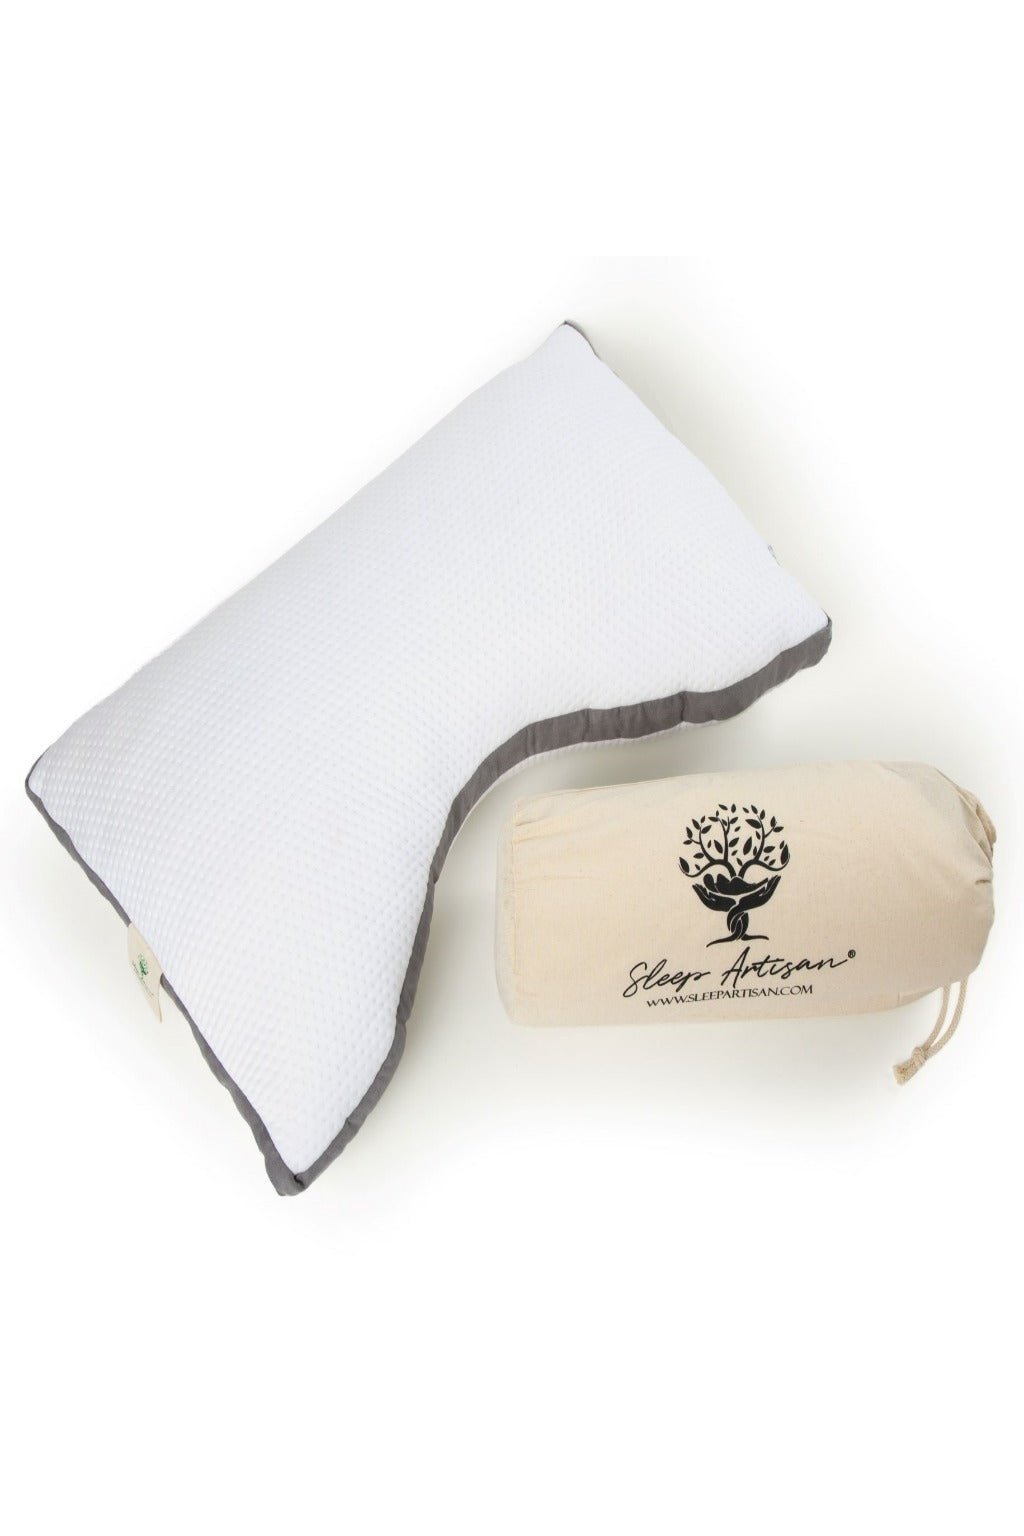 SleepFit Pillow - Luxury Side Sleeper Pillow with Washable Cover